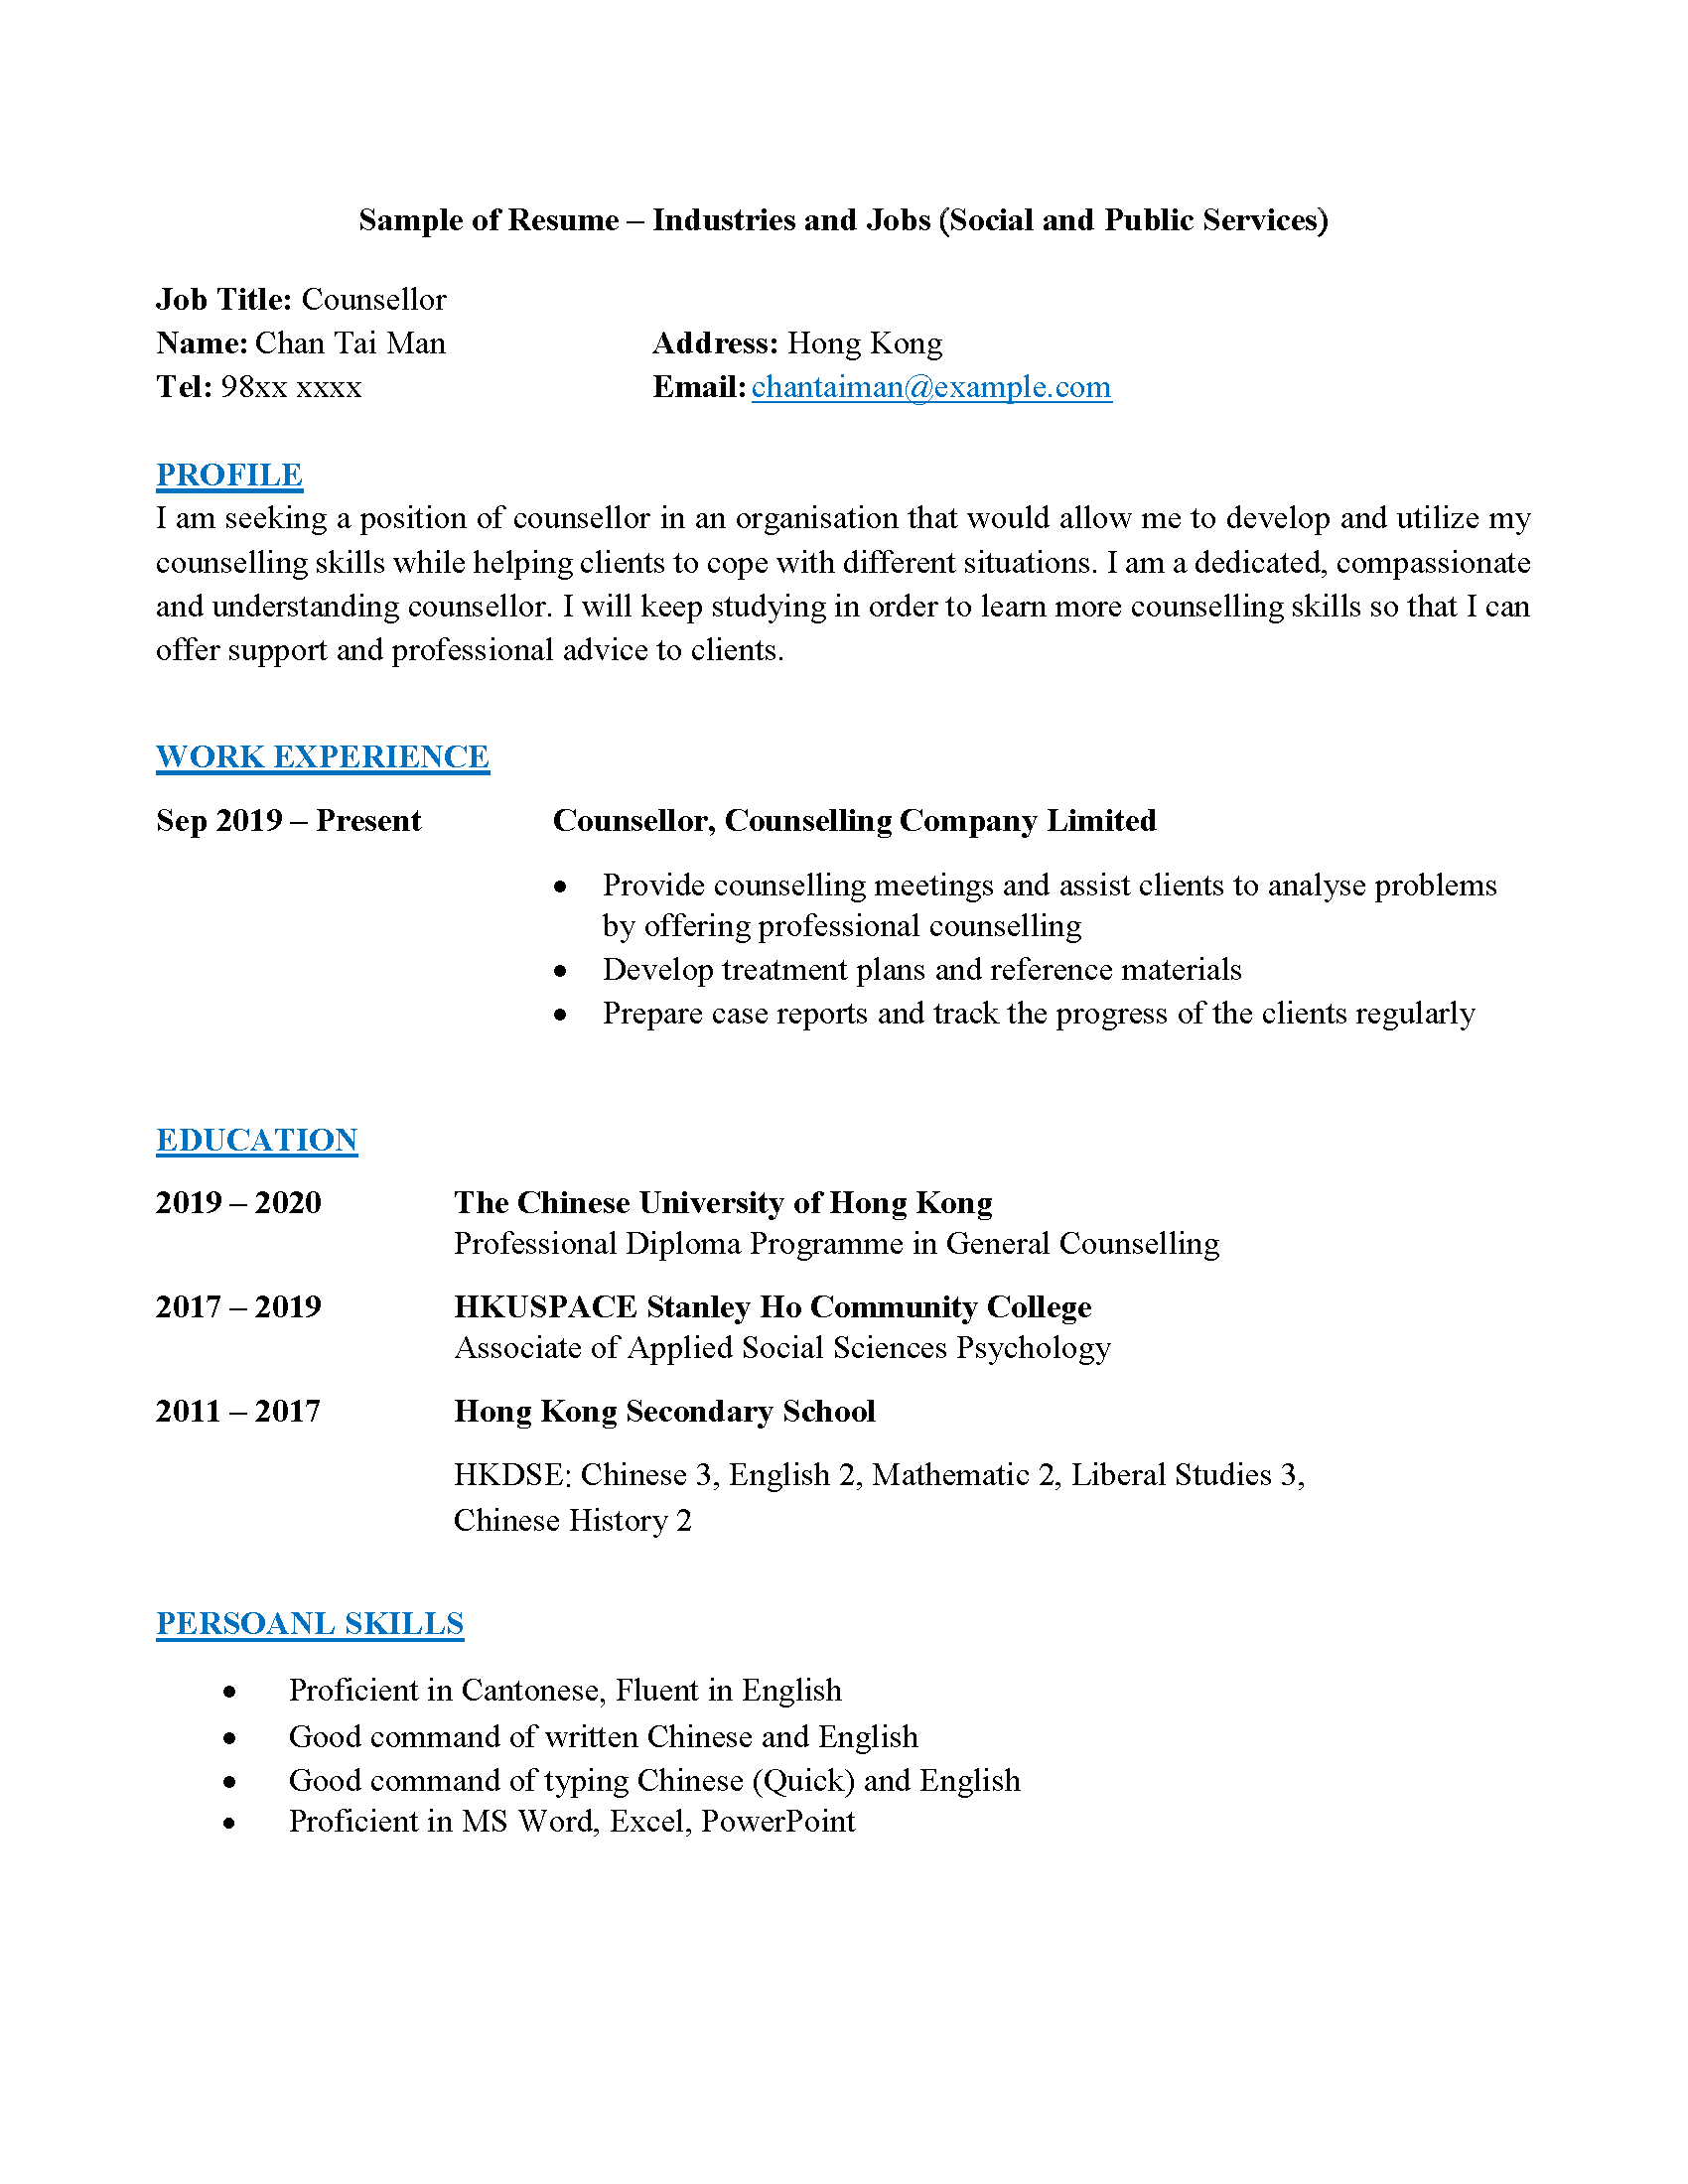 Counsellor Resume Sample